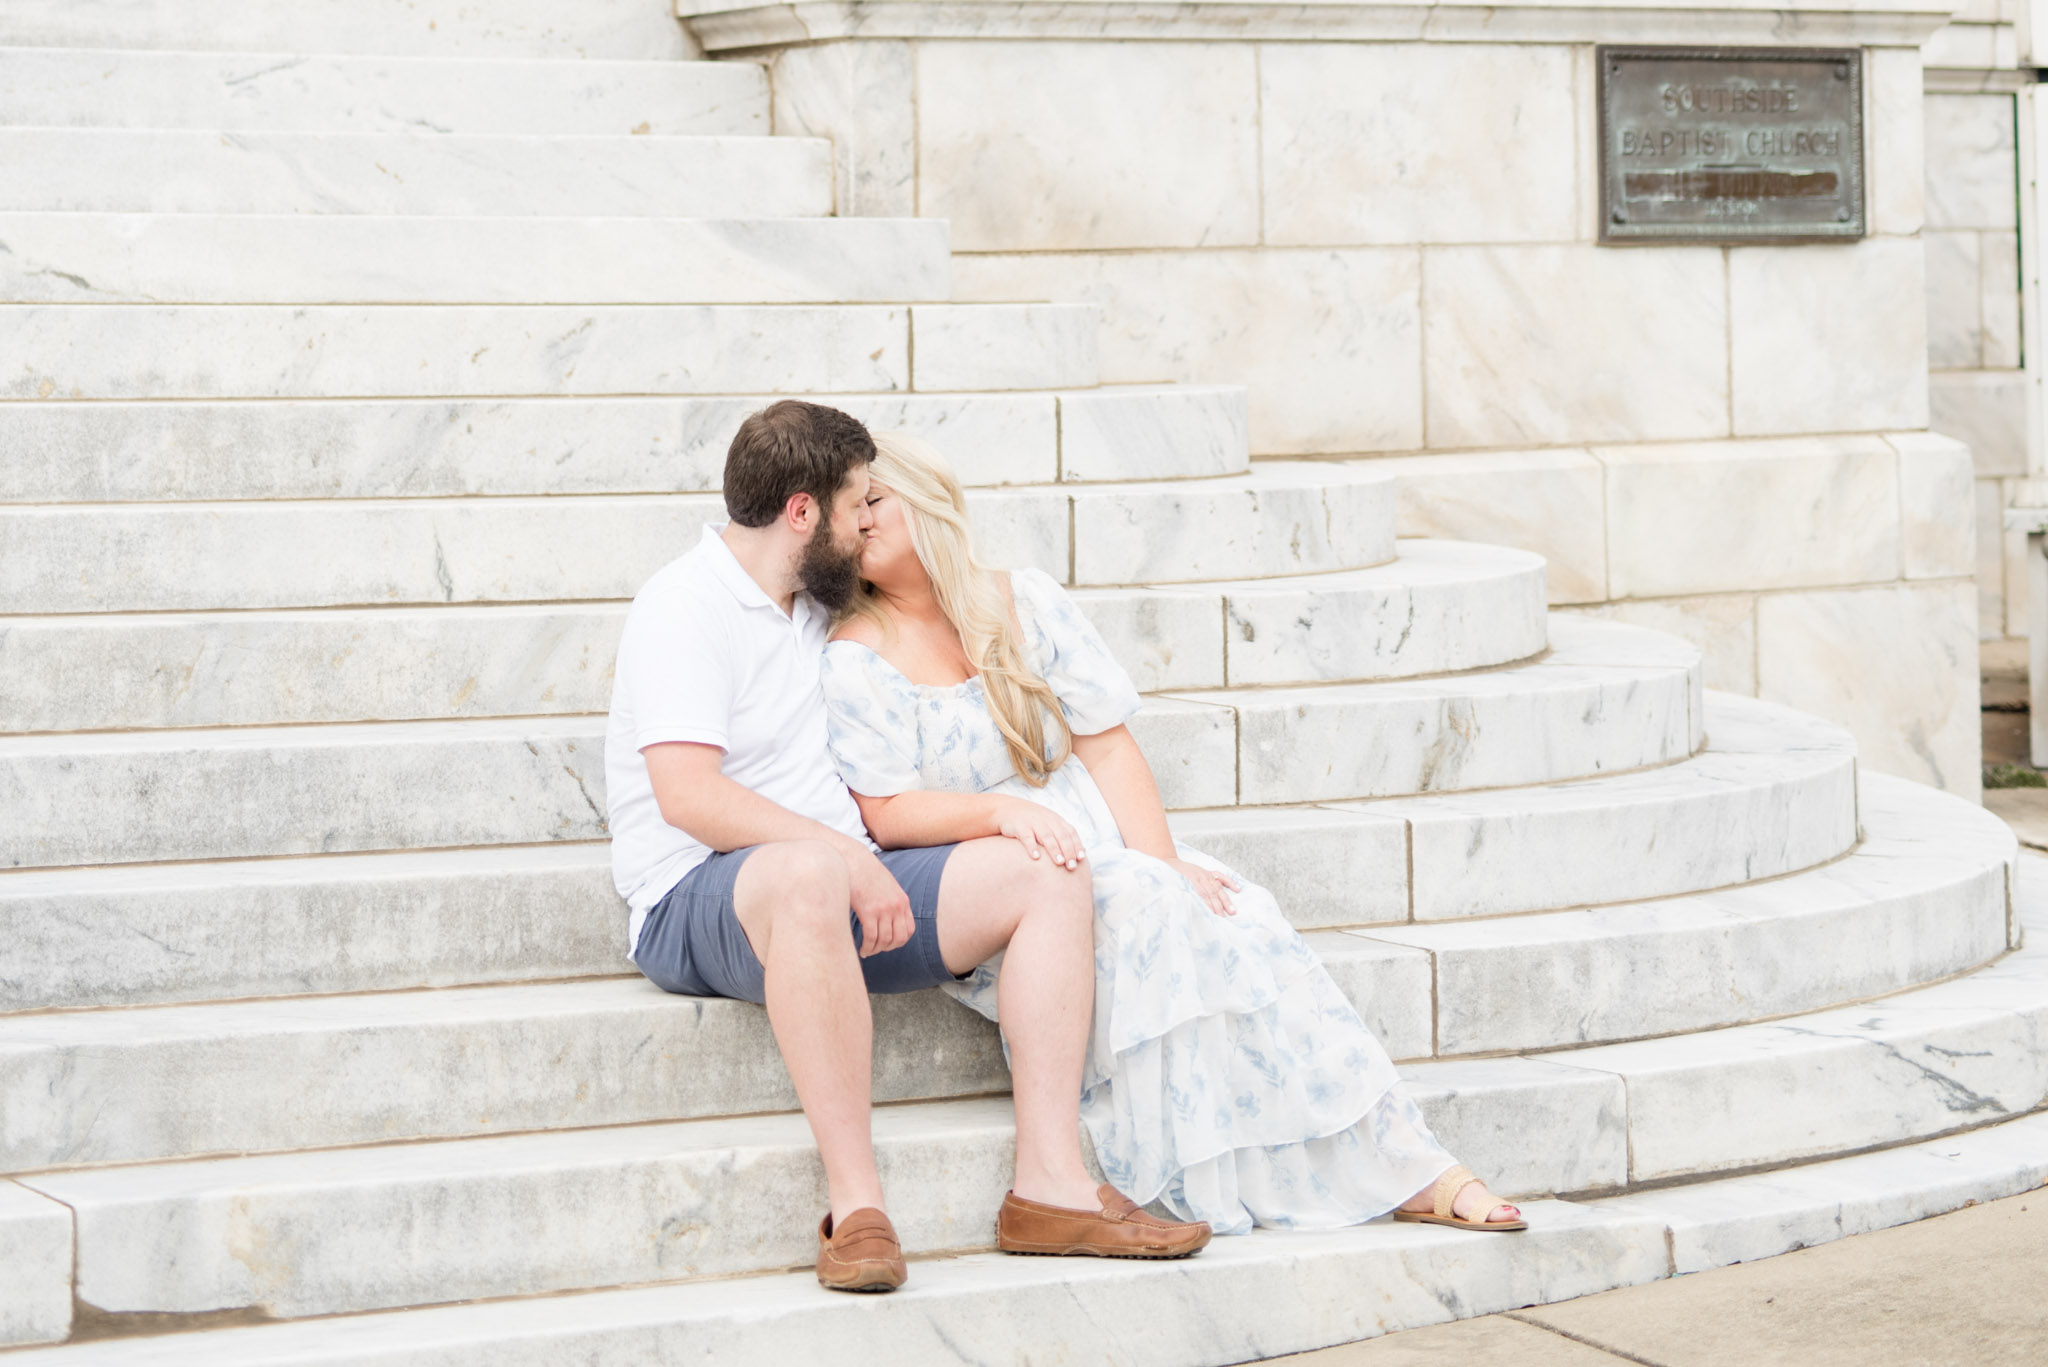 Married couple kisses while sitting on marble stairs.